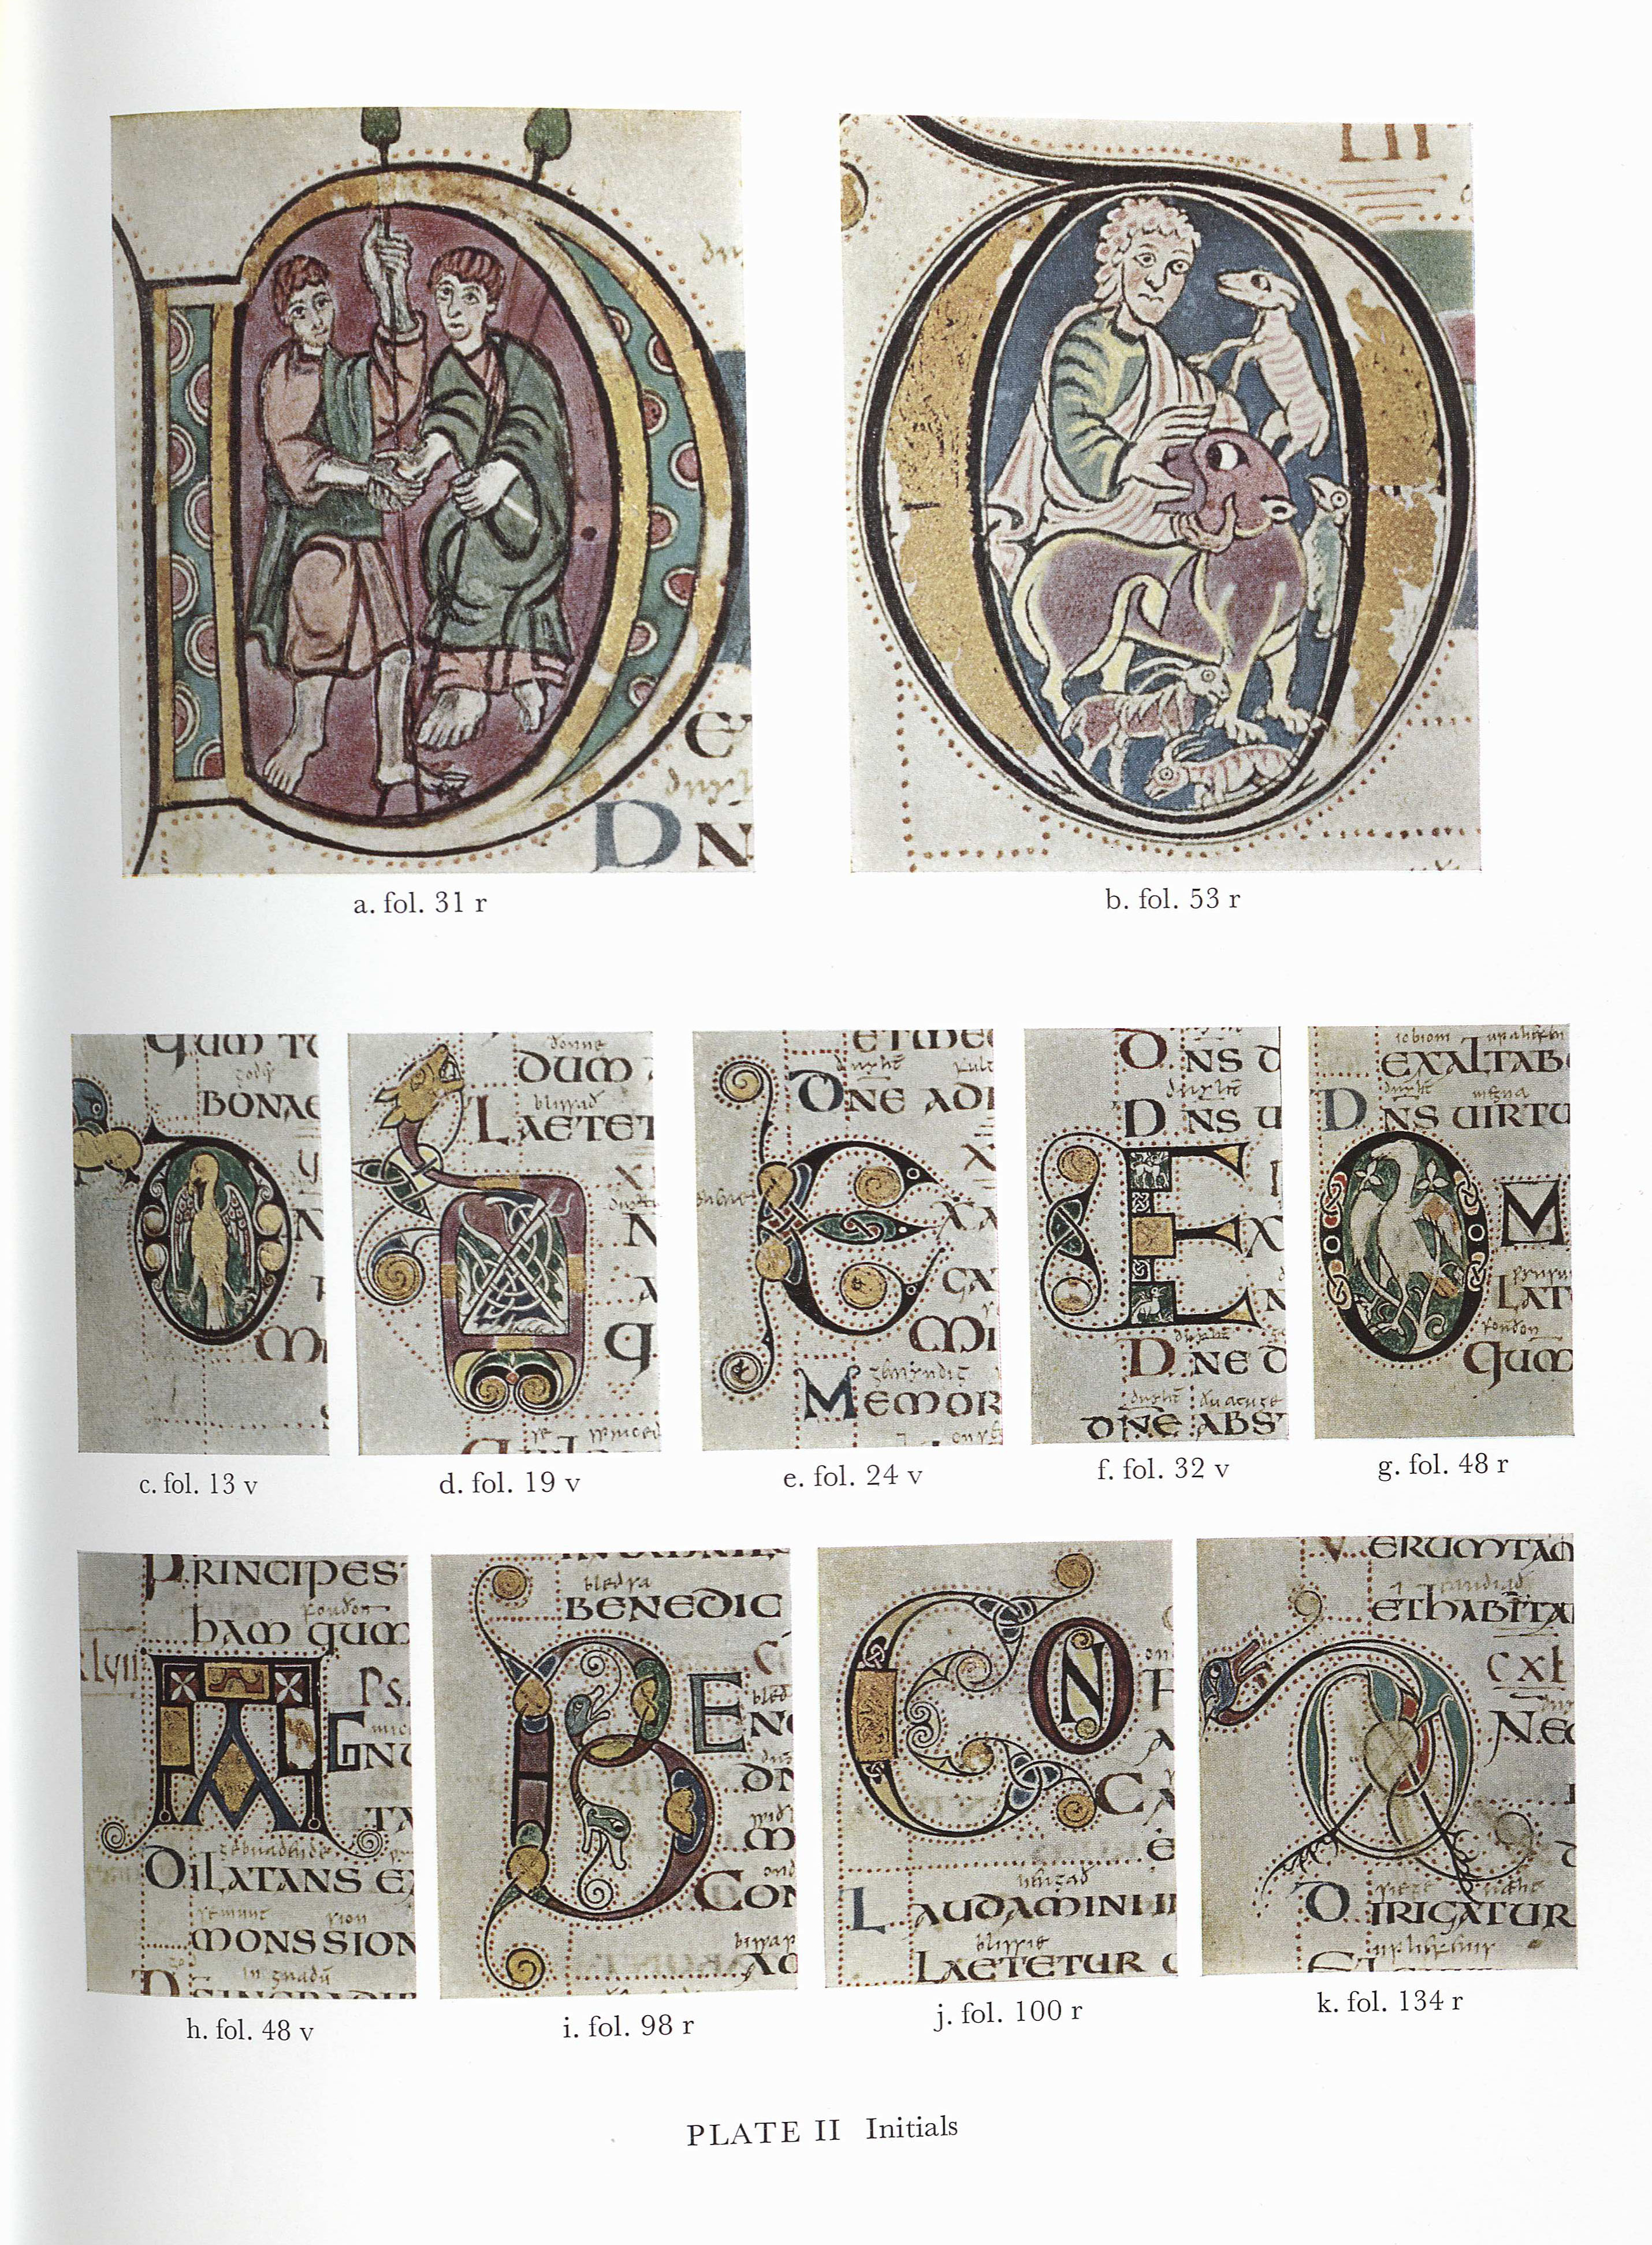 Examples of initials from the Vespasian Psalter (Image by Anne Causey)